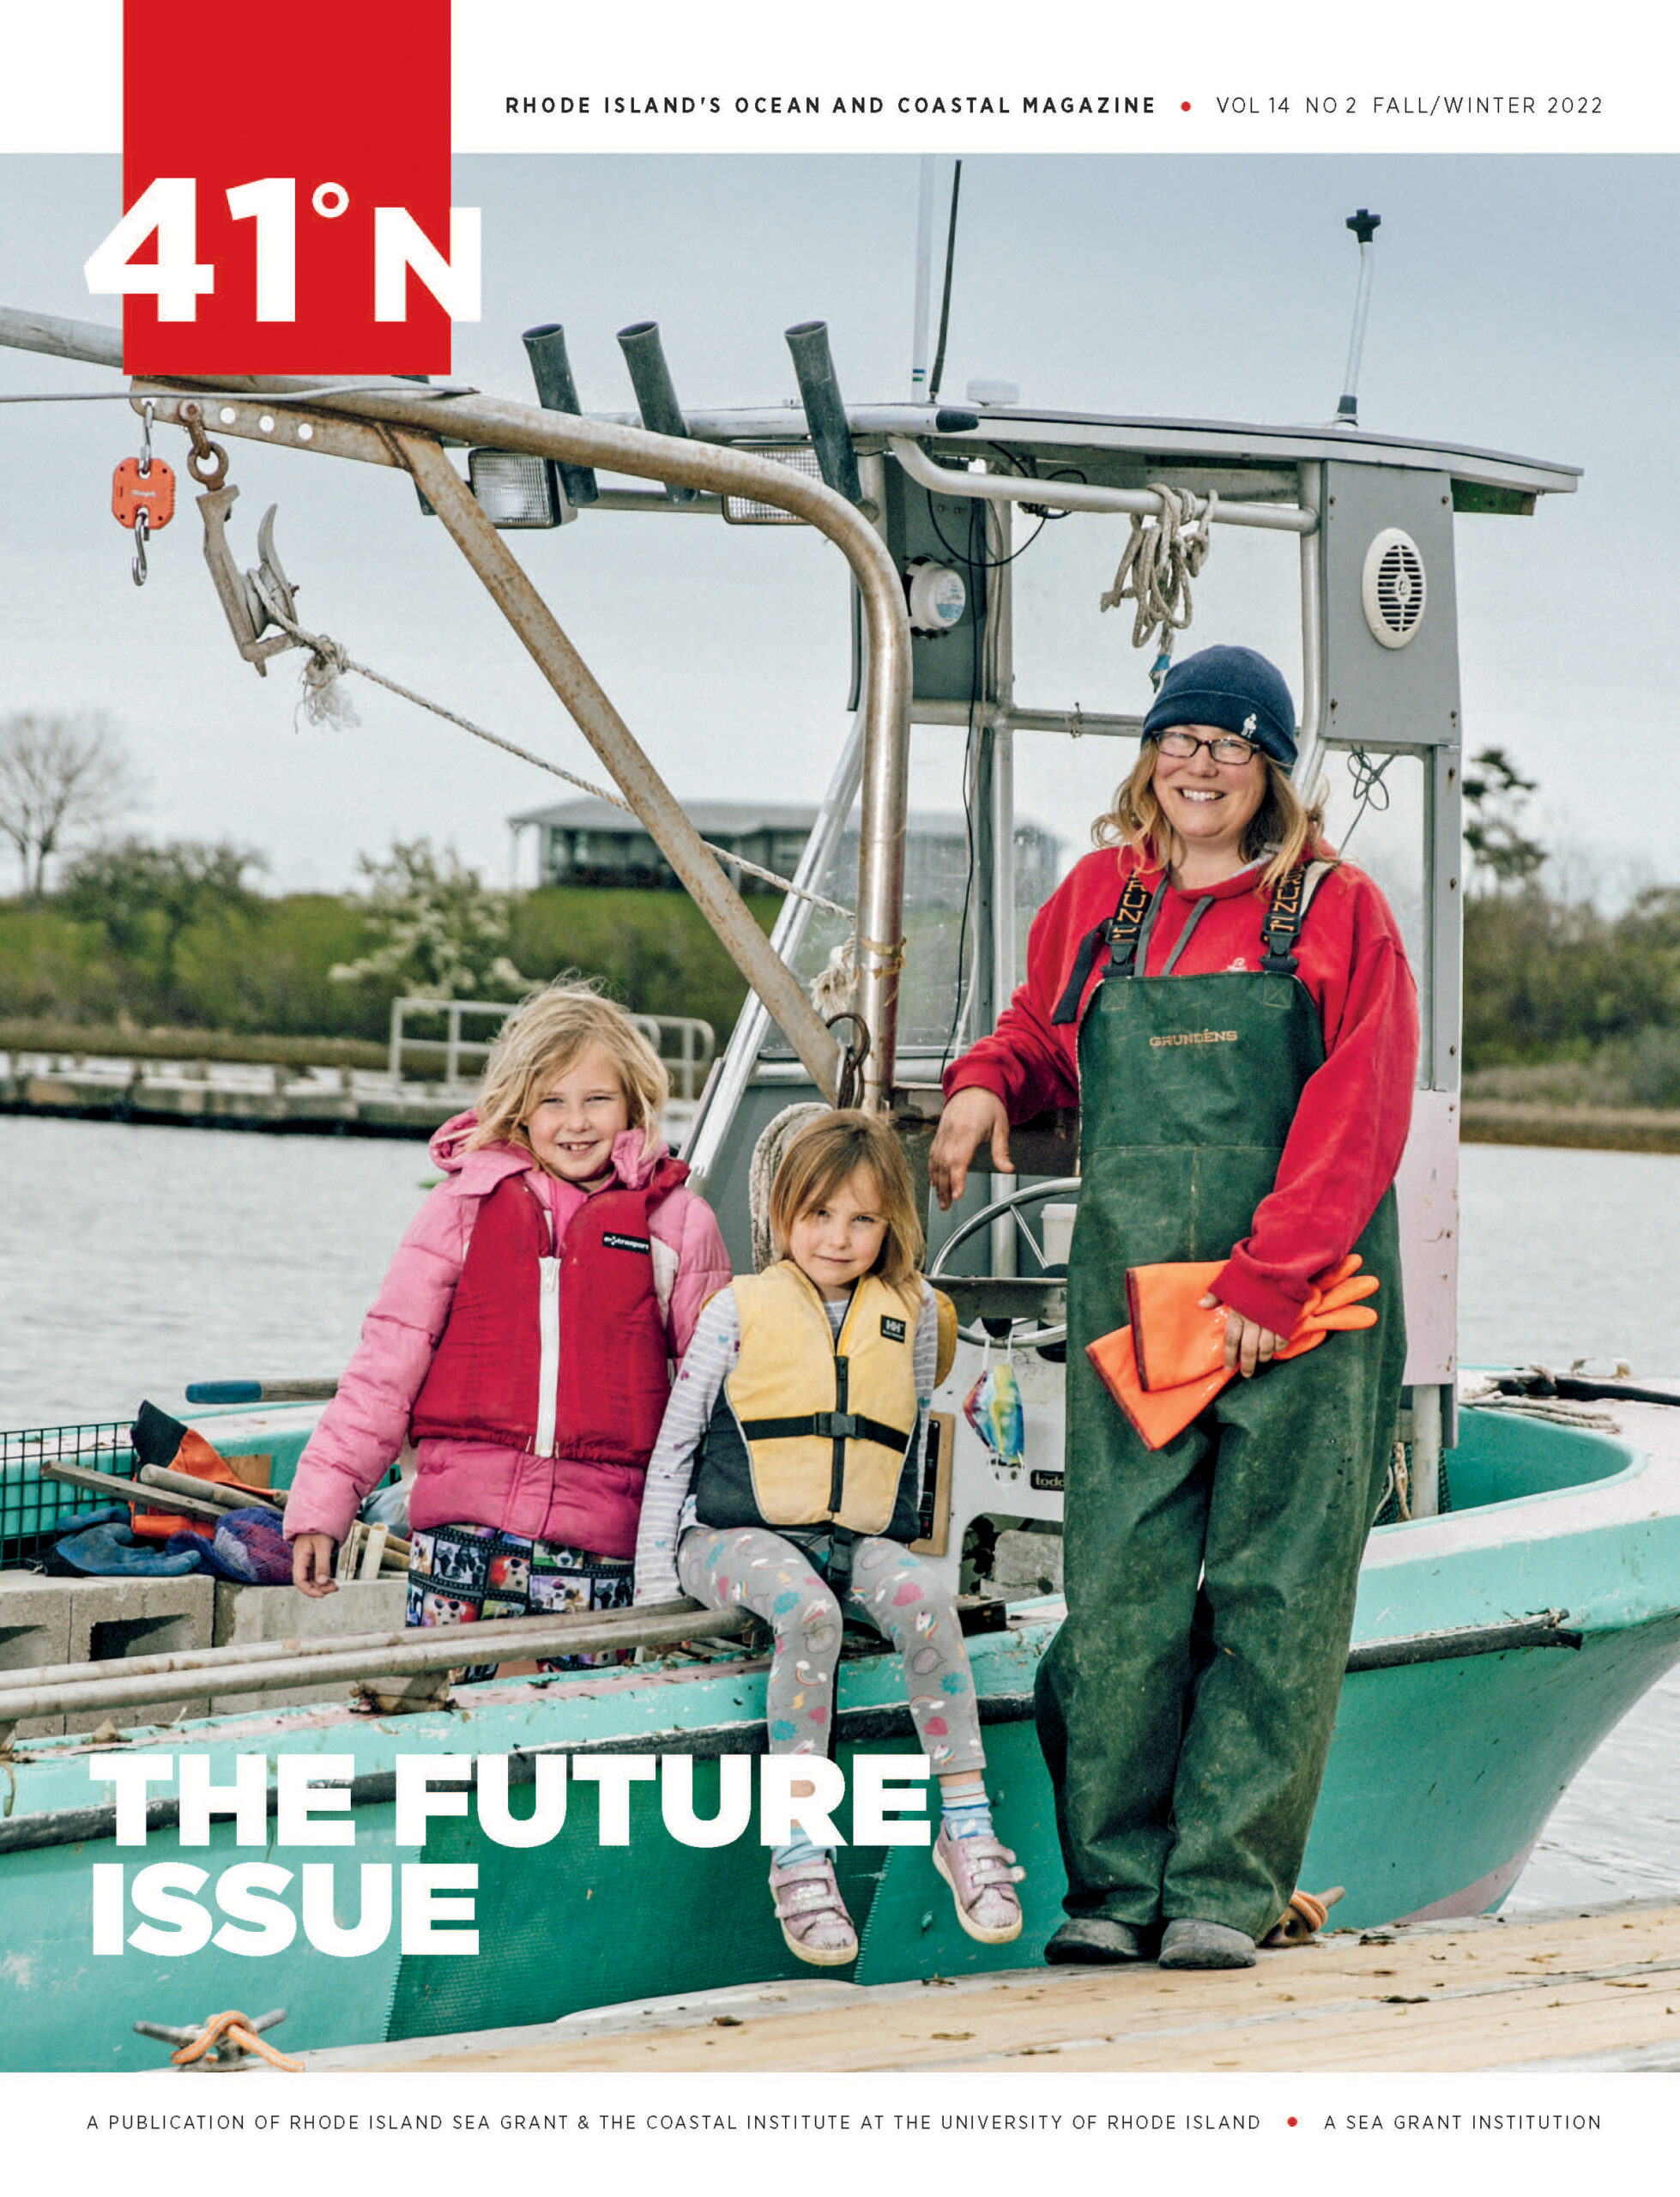 Cover shot kelp farmer on a boat with her young daughters.